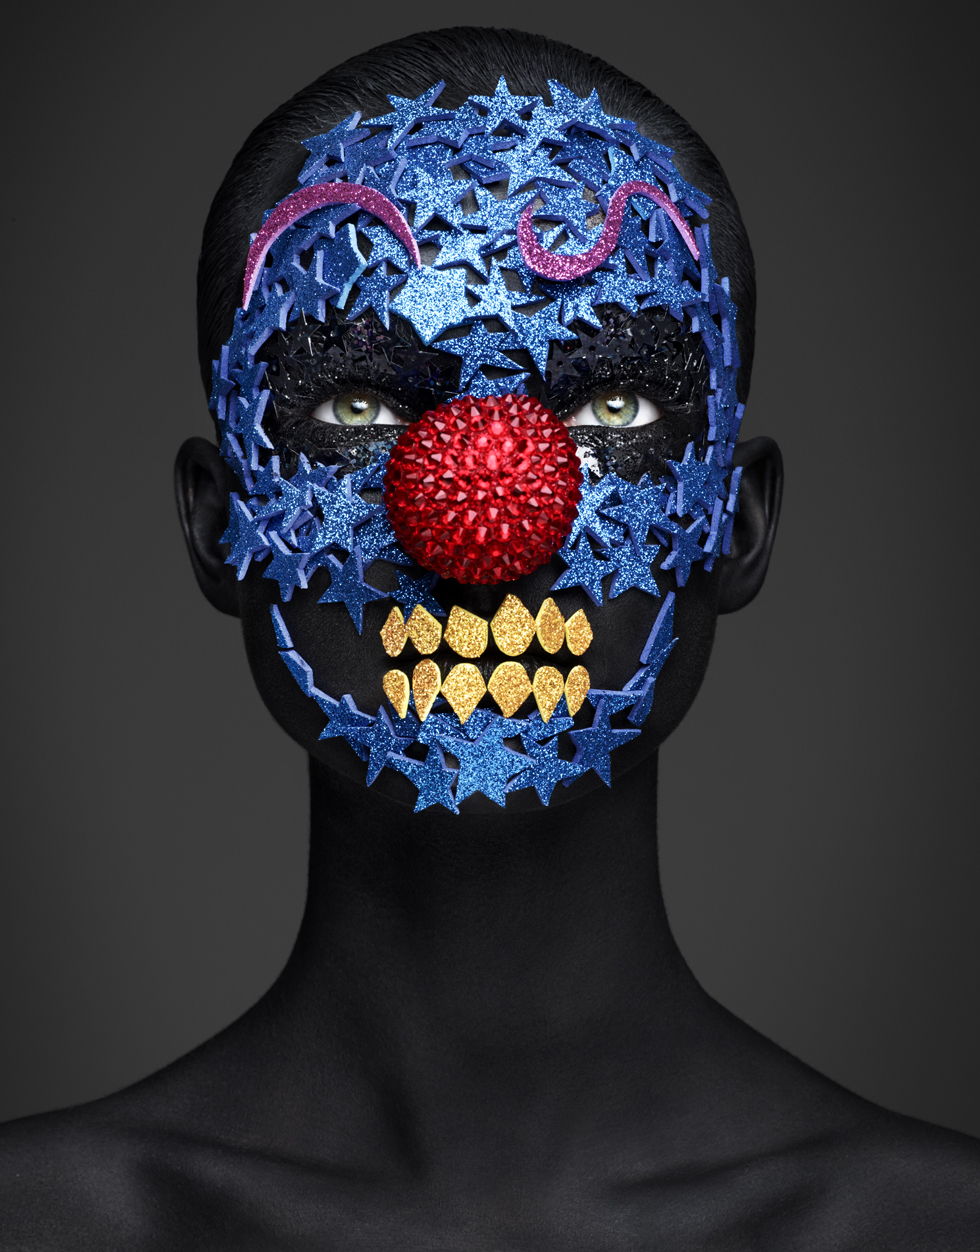 epitaph editorial by rankin andrew gallimore